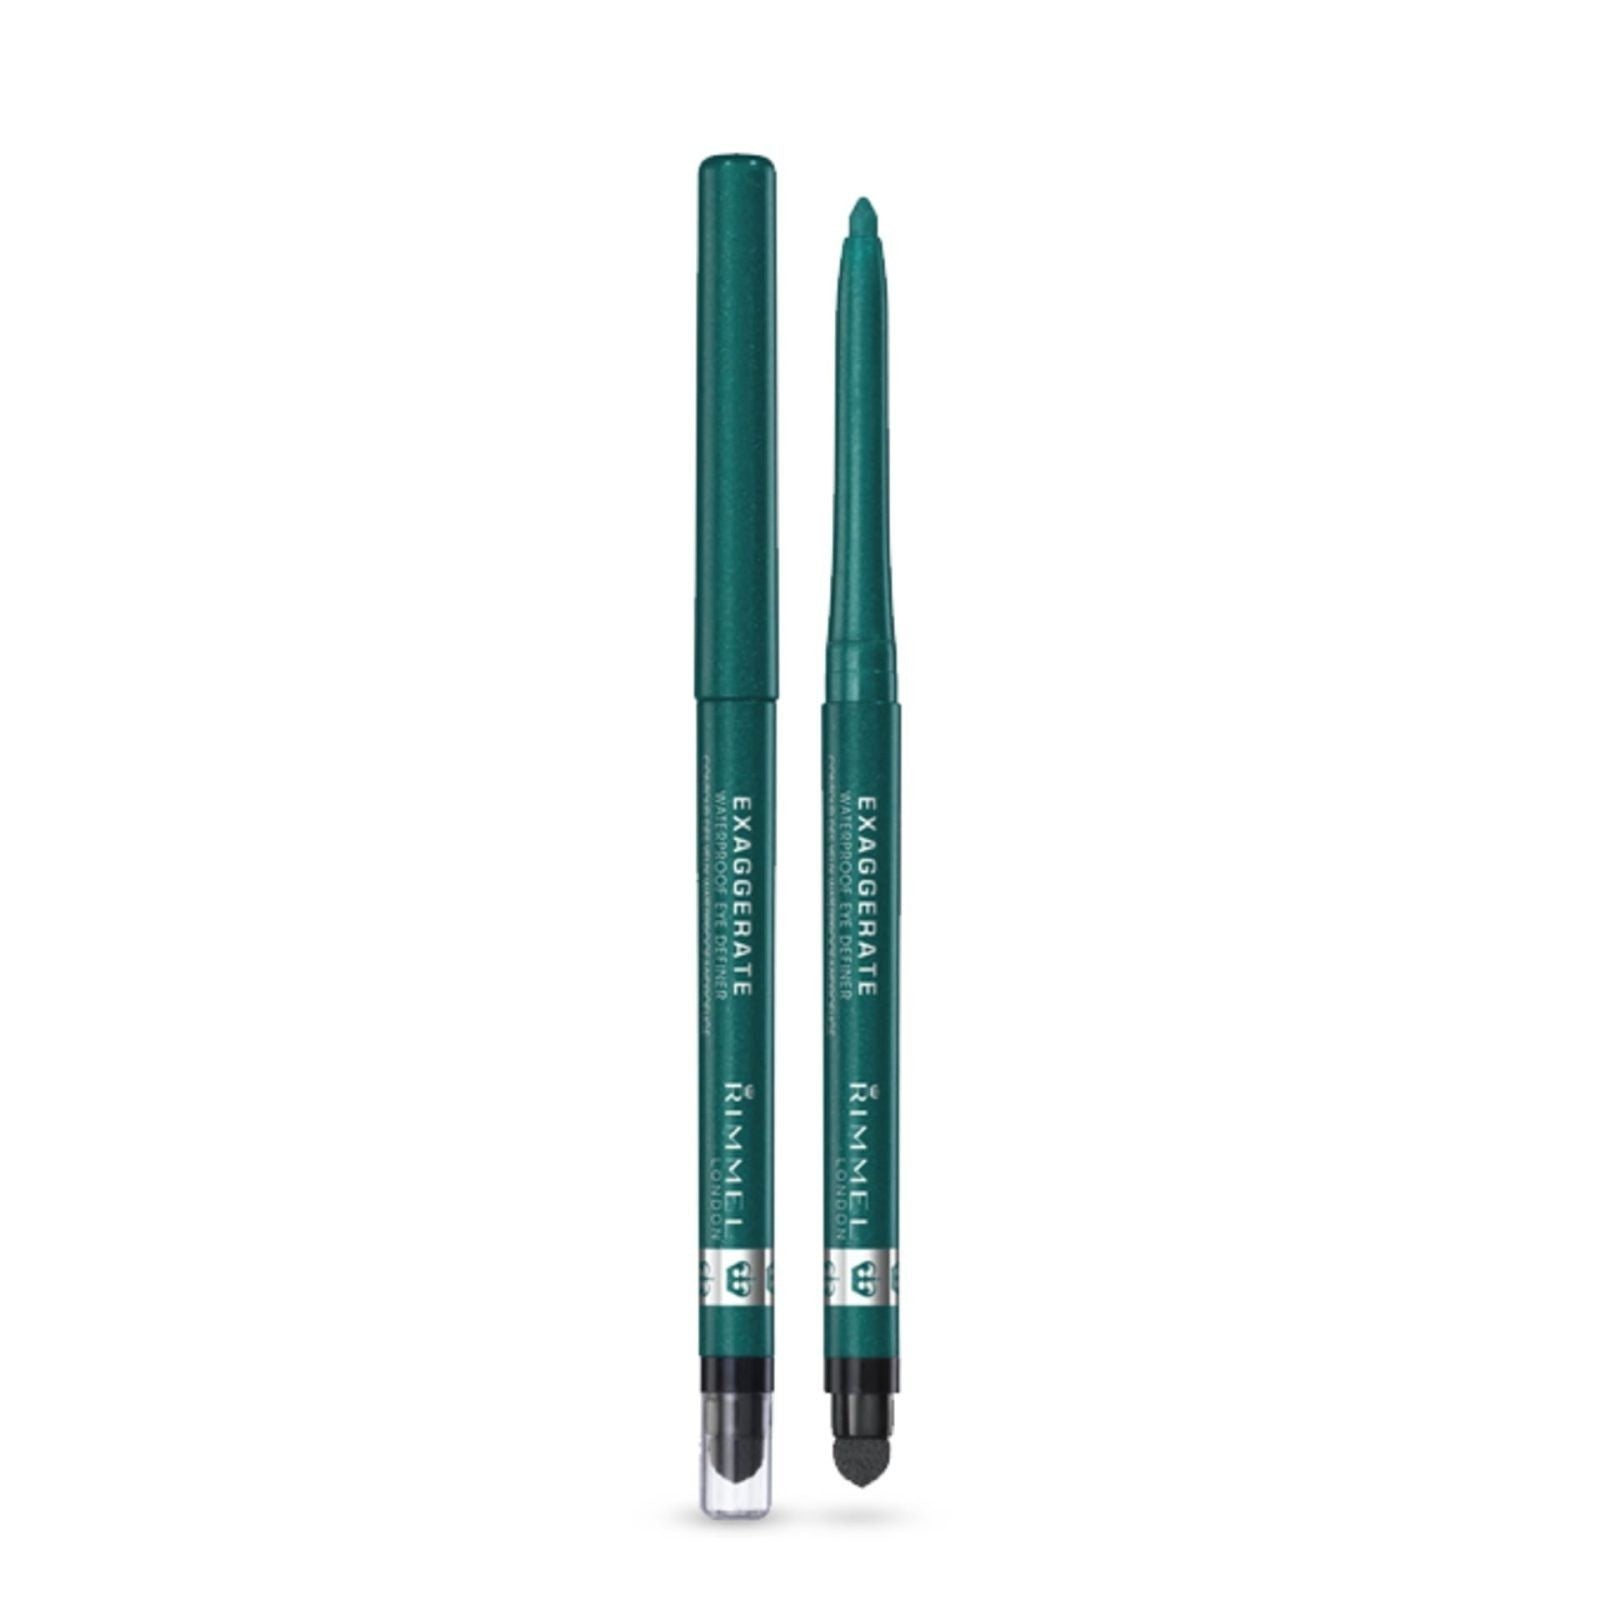 Rimmel Exaggerate Waterproof Eye Definer 250 Emerald Sparkle A Teal Green Shade - AllurebeautypkRimmel Exaggerate Waterproof Eye Definer 250 Emerald Sparkle A Teal Green Shade